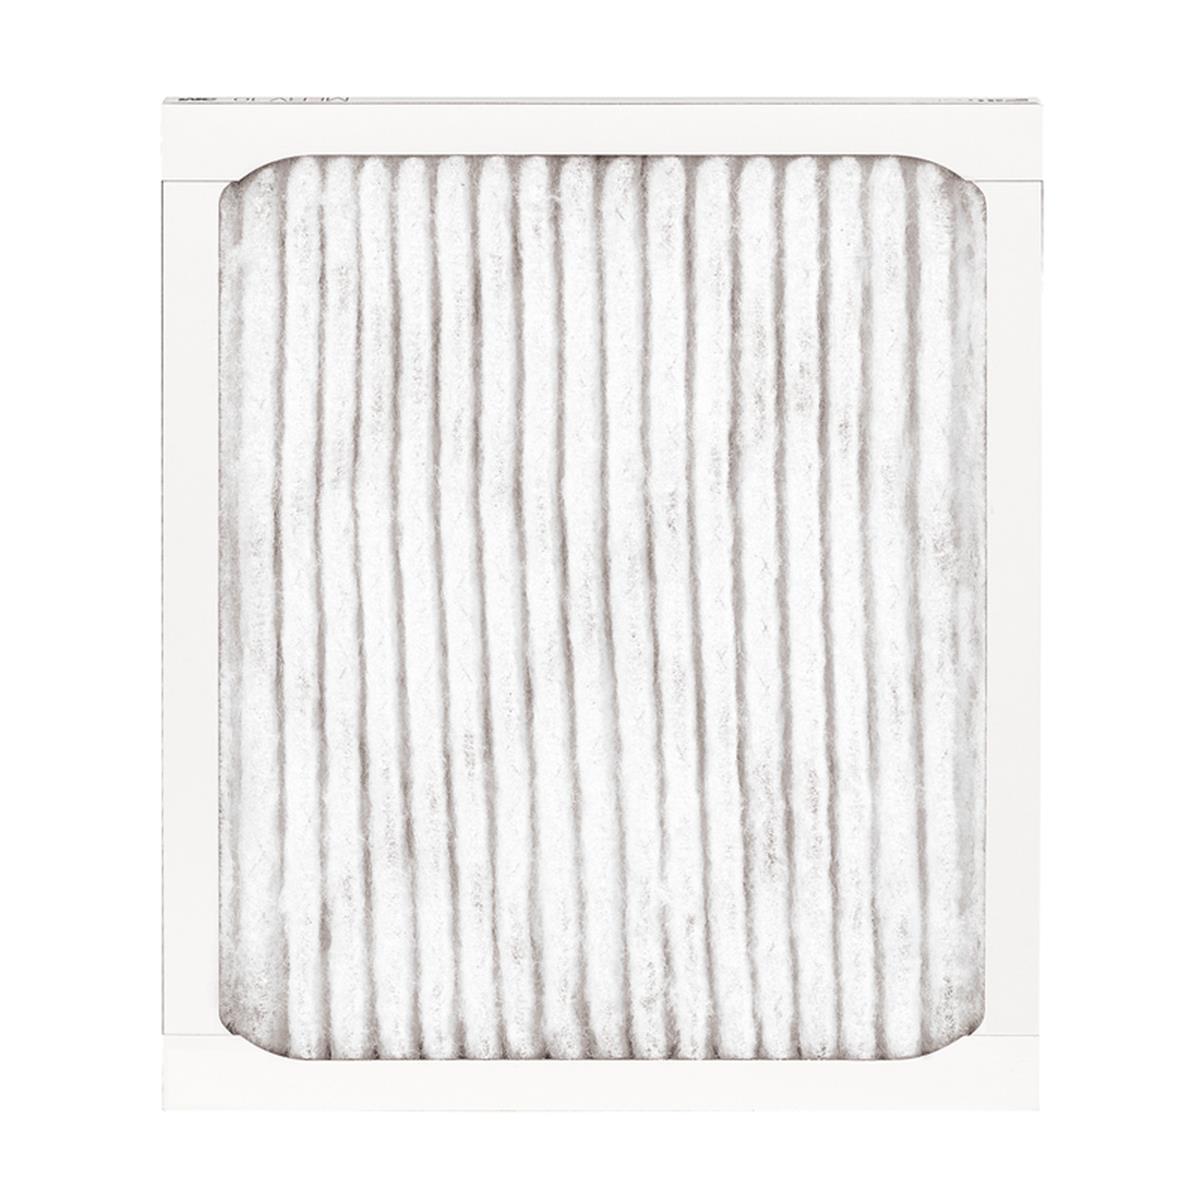 Picture of 3M 4005294 18 x 24 x 1 in. 1000 MPR Air Filter - Pack of 4